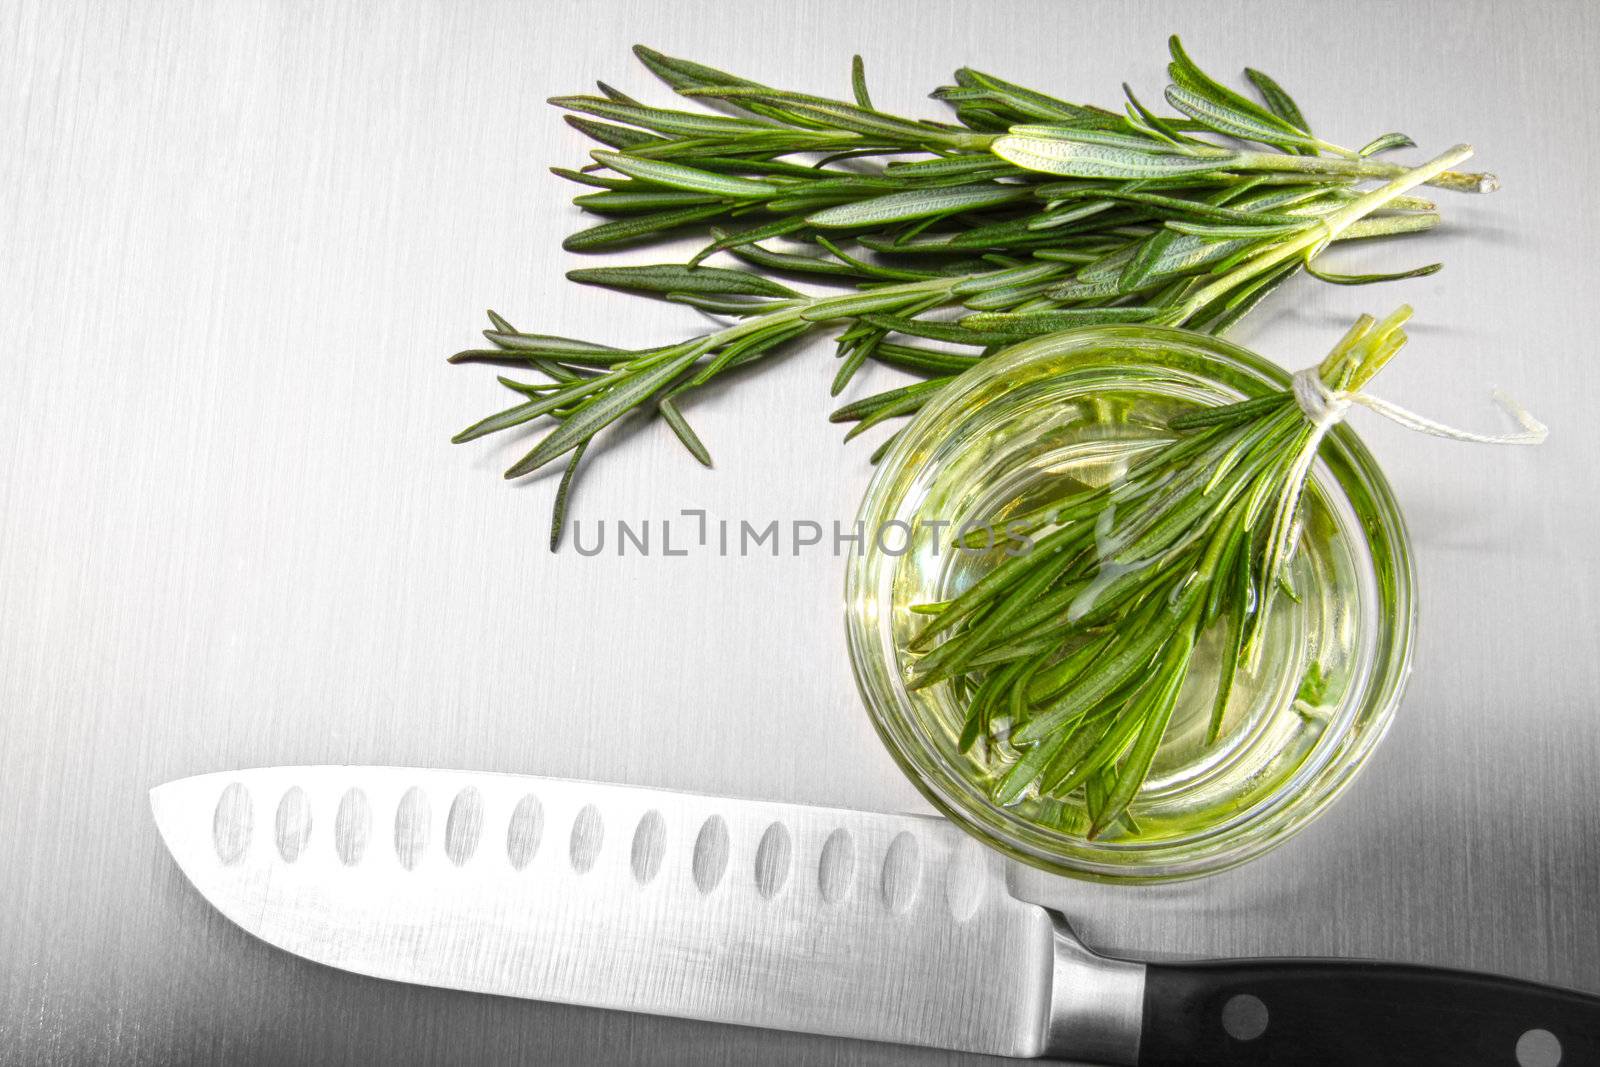 Rosemary leaves with cutting on stainless steel  by Sandralise